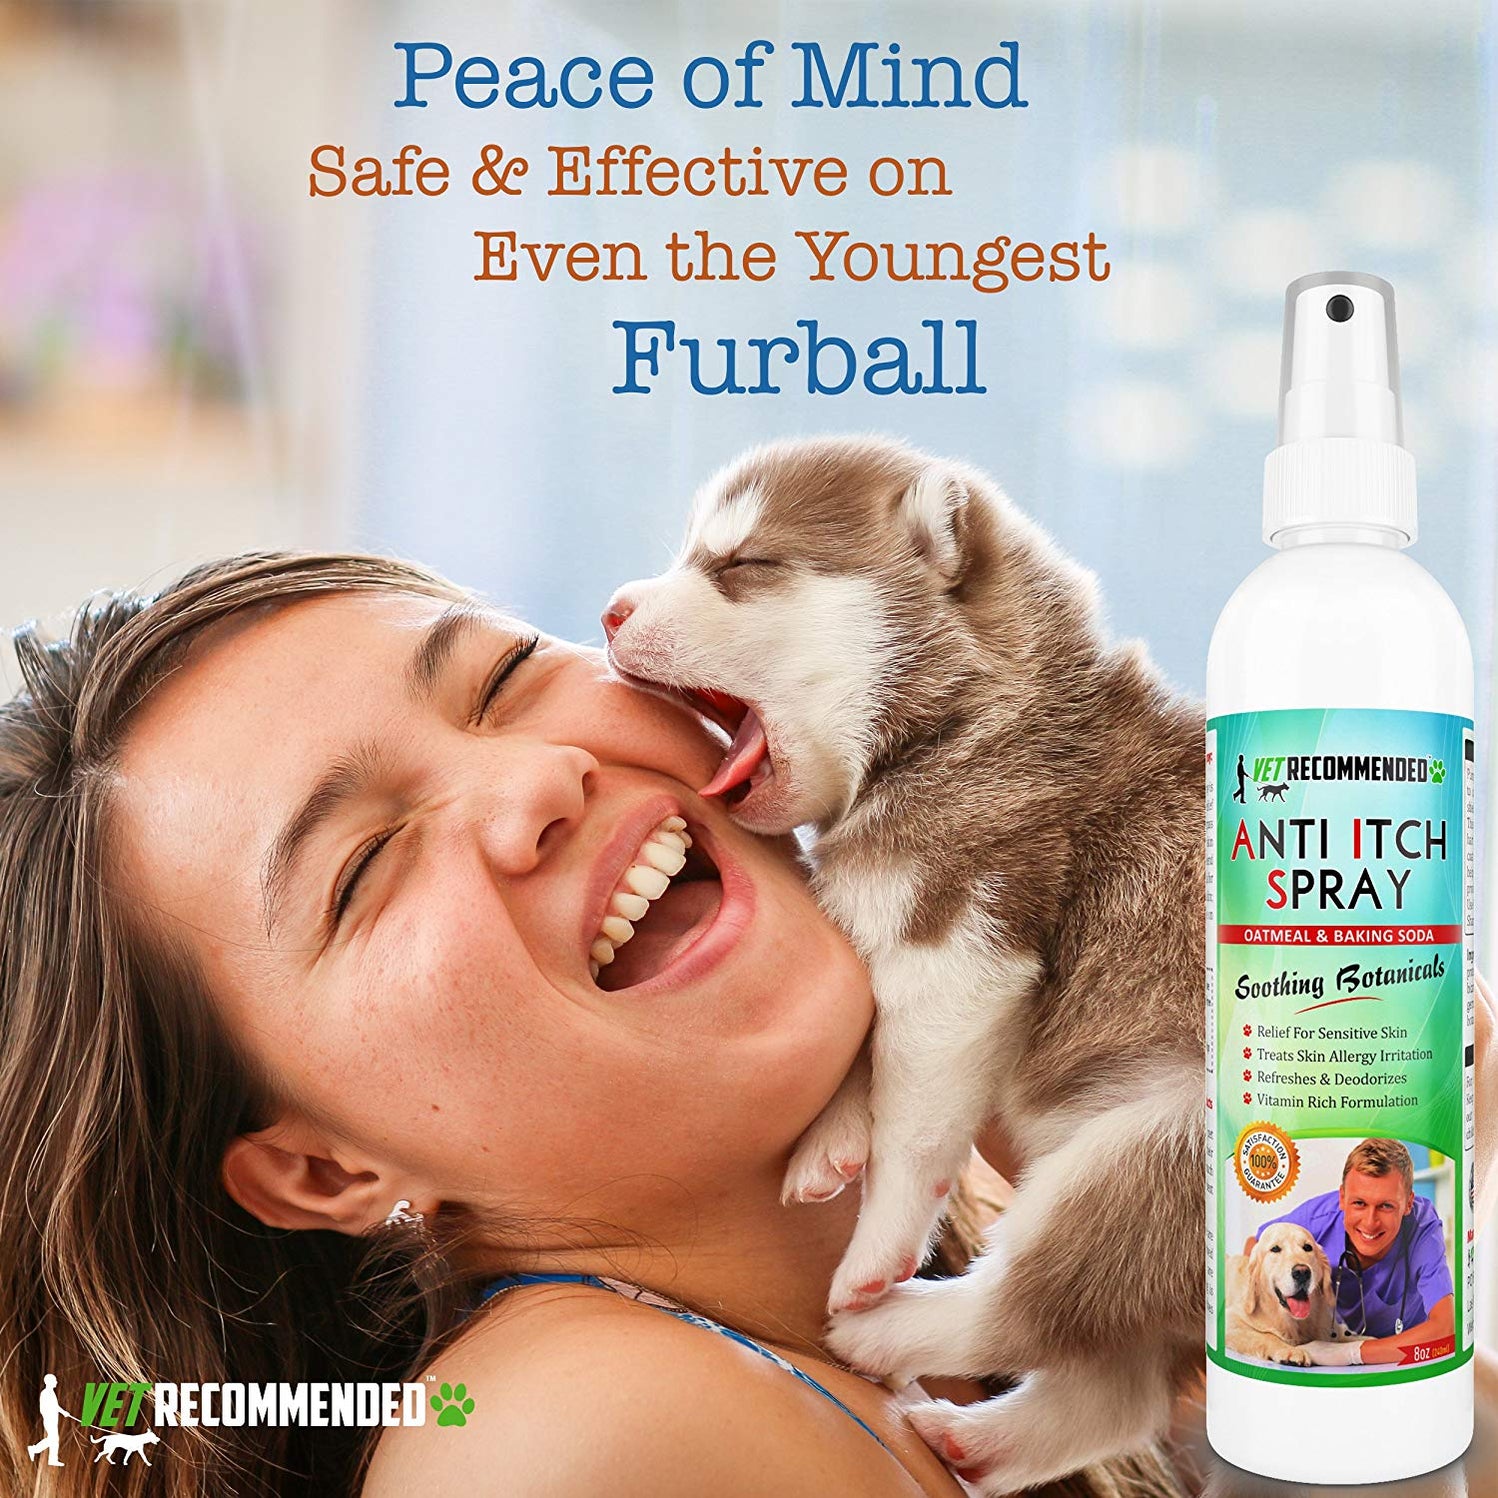 Anti-Itch Oatmeal & Baking Soda Spray - Calming of Skin for Insect Bit